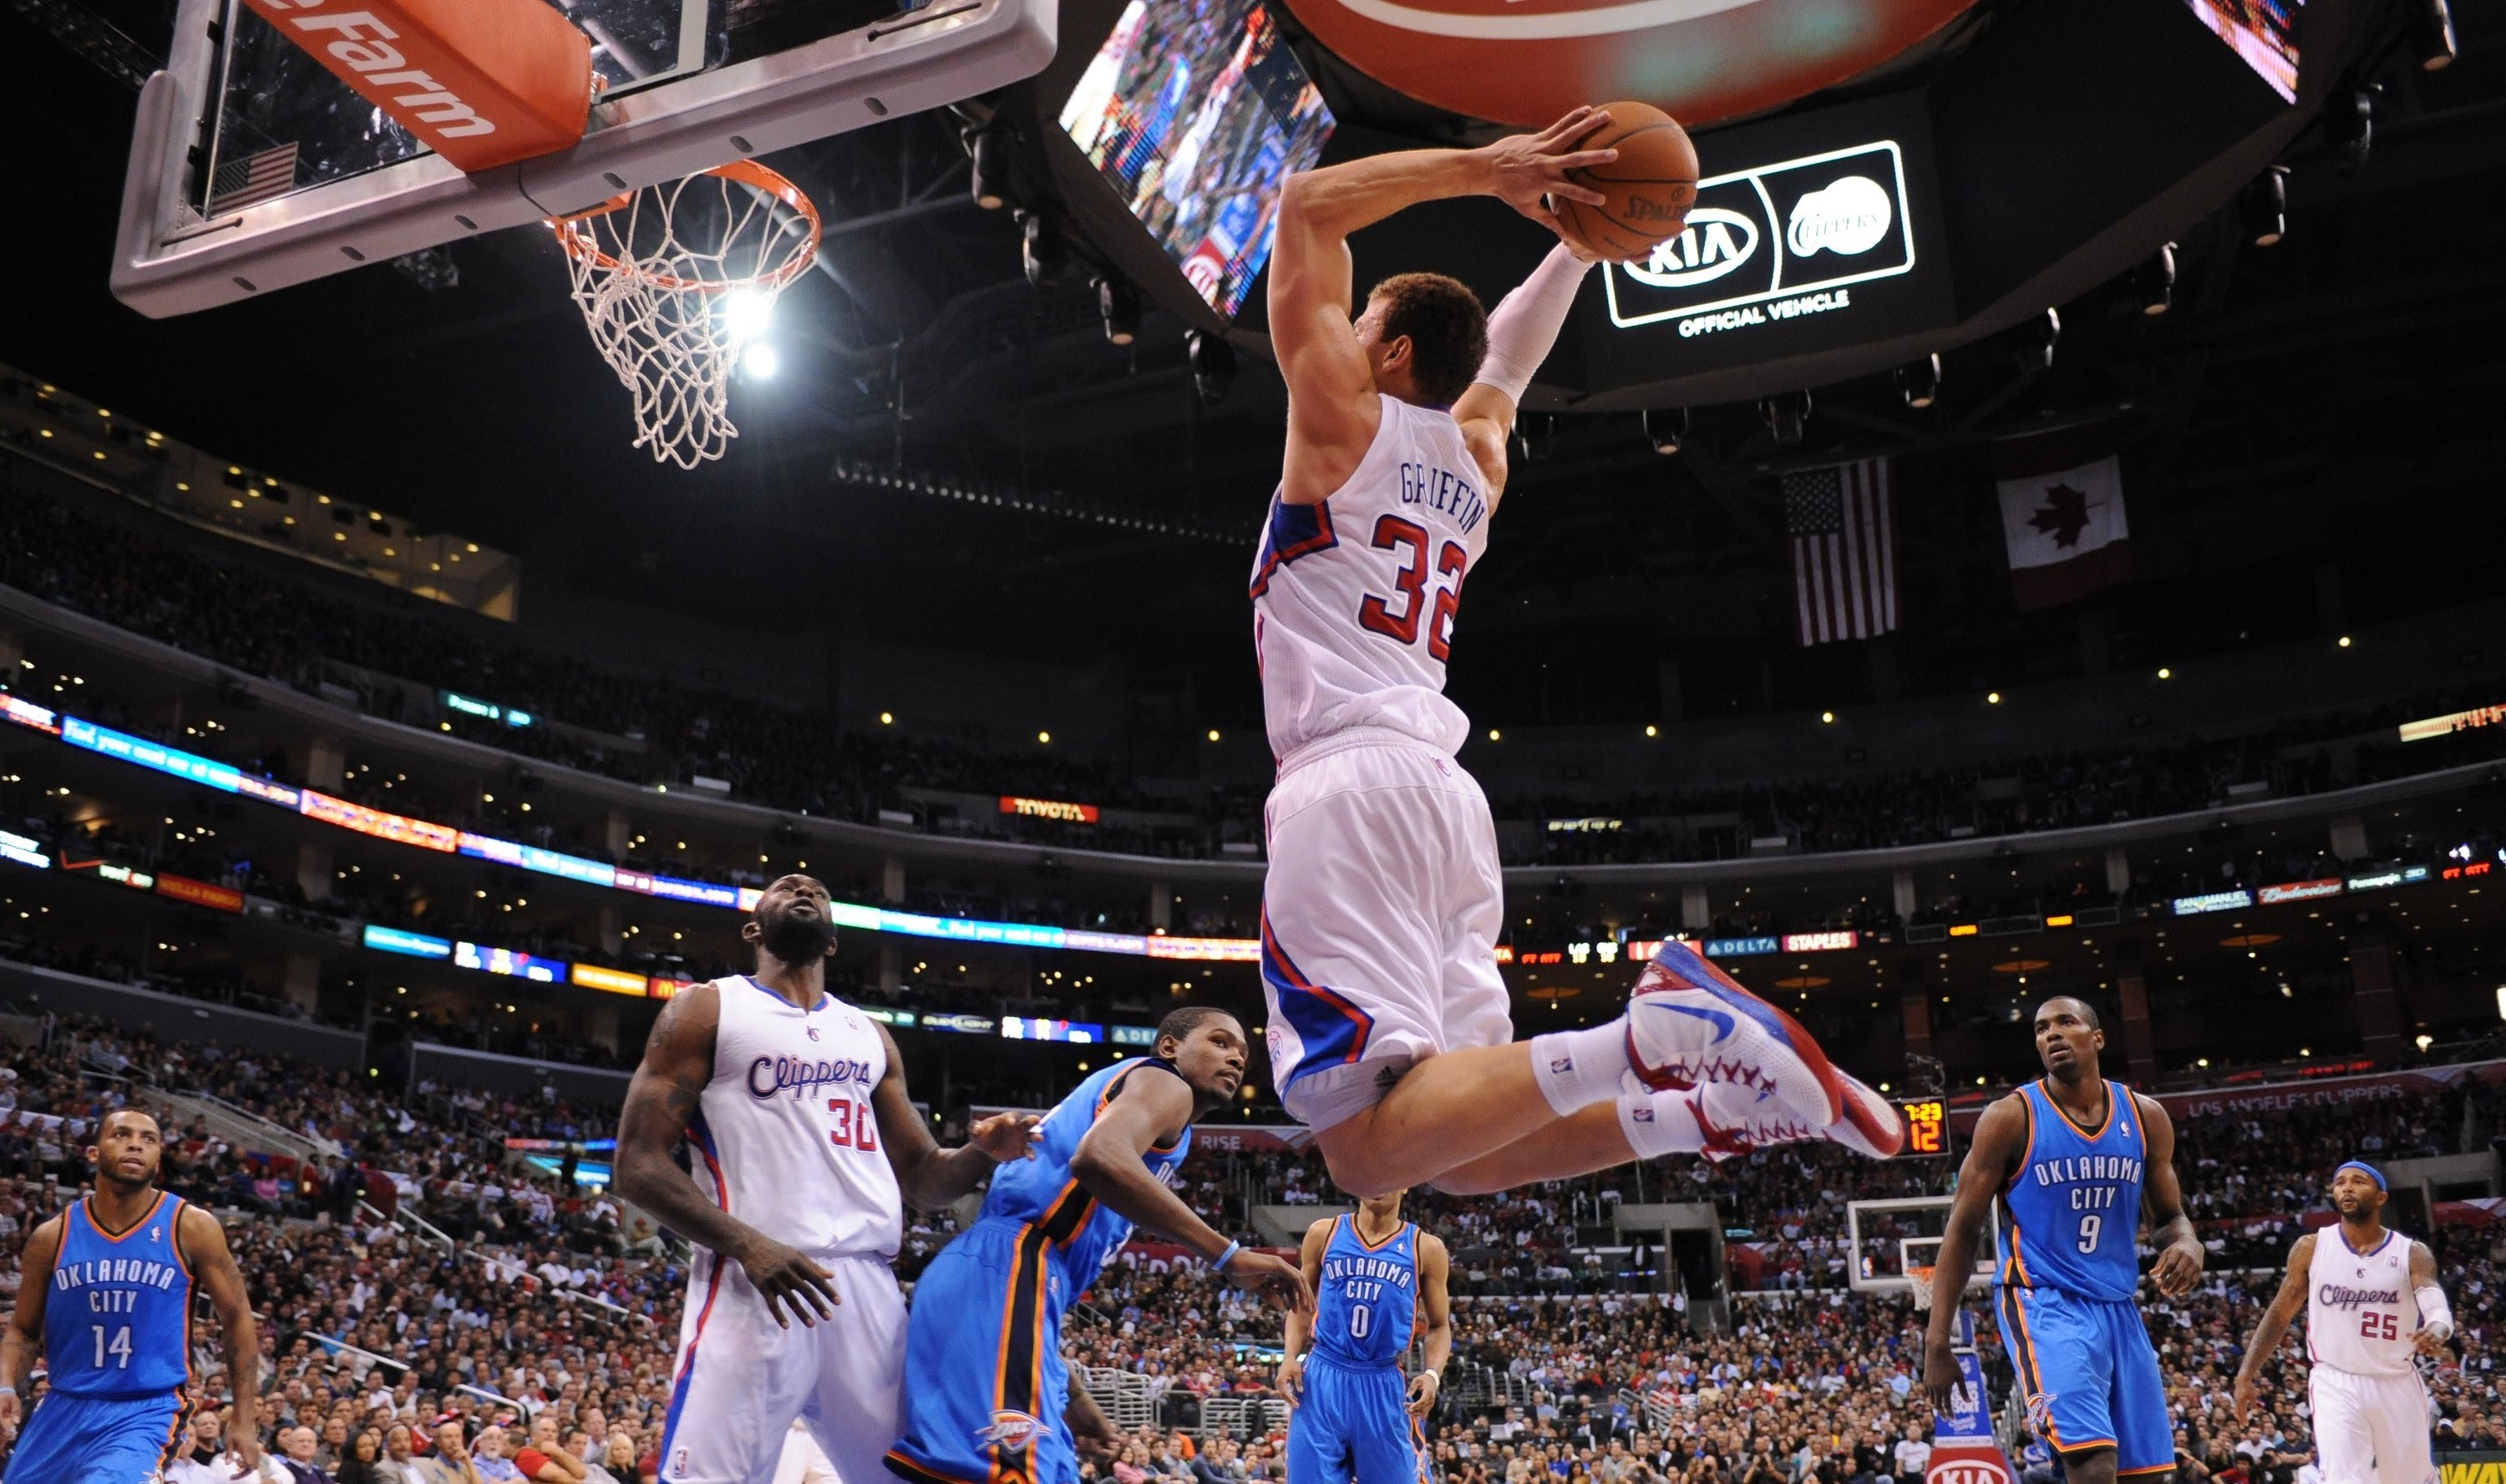 NBA, Basketball, Jumping, Blake Griffin, Los Angeles Clippers